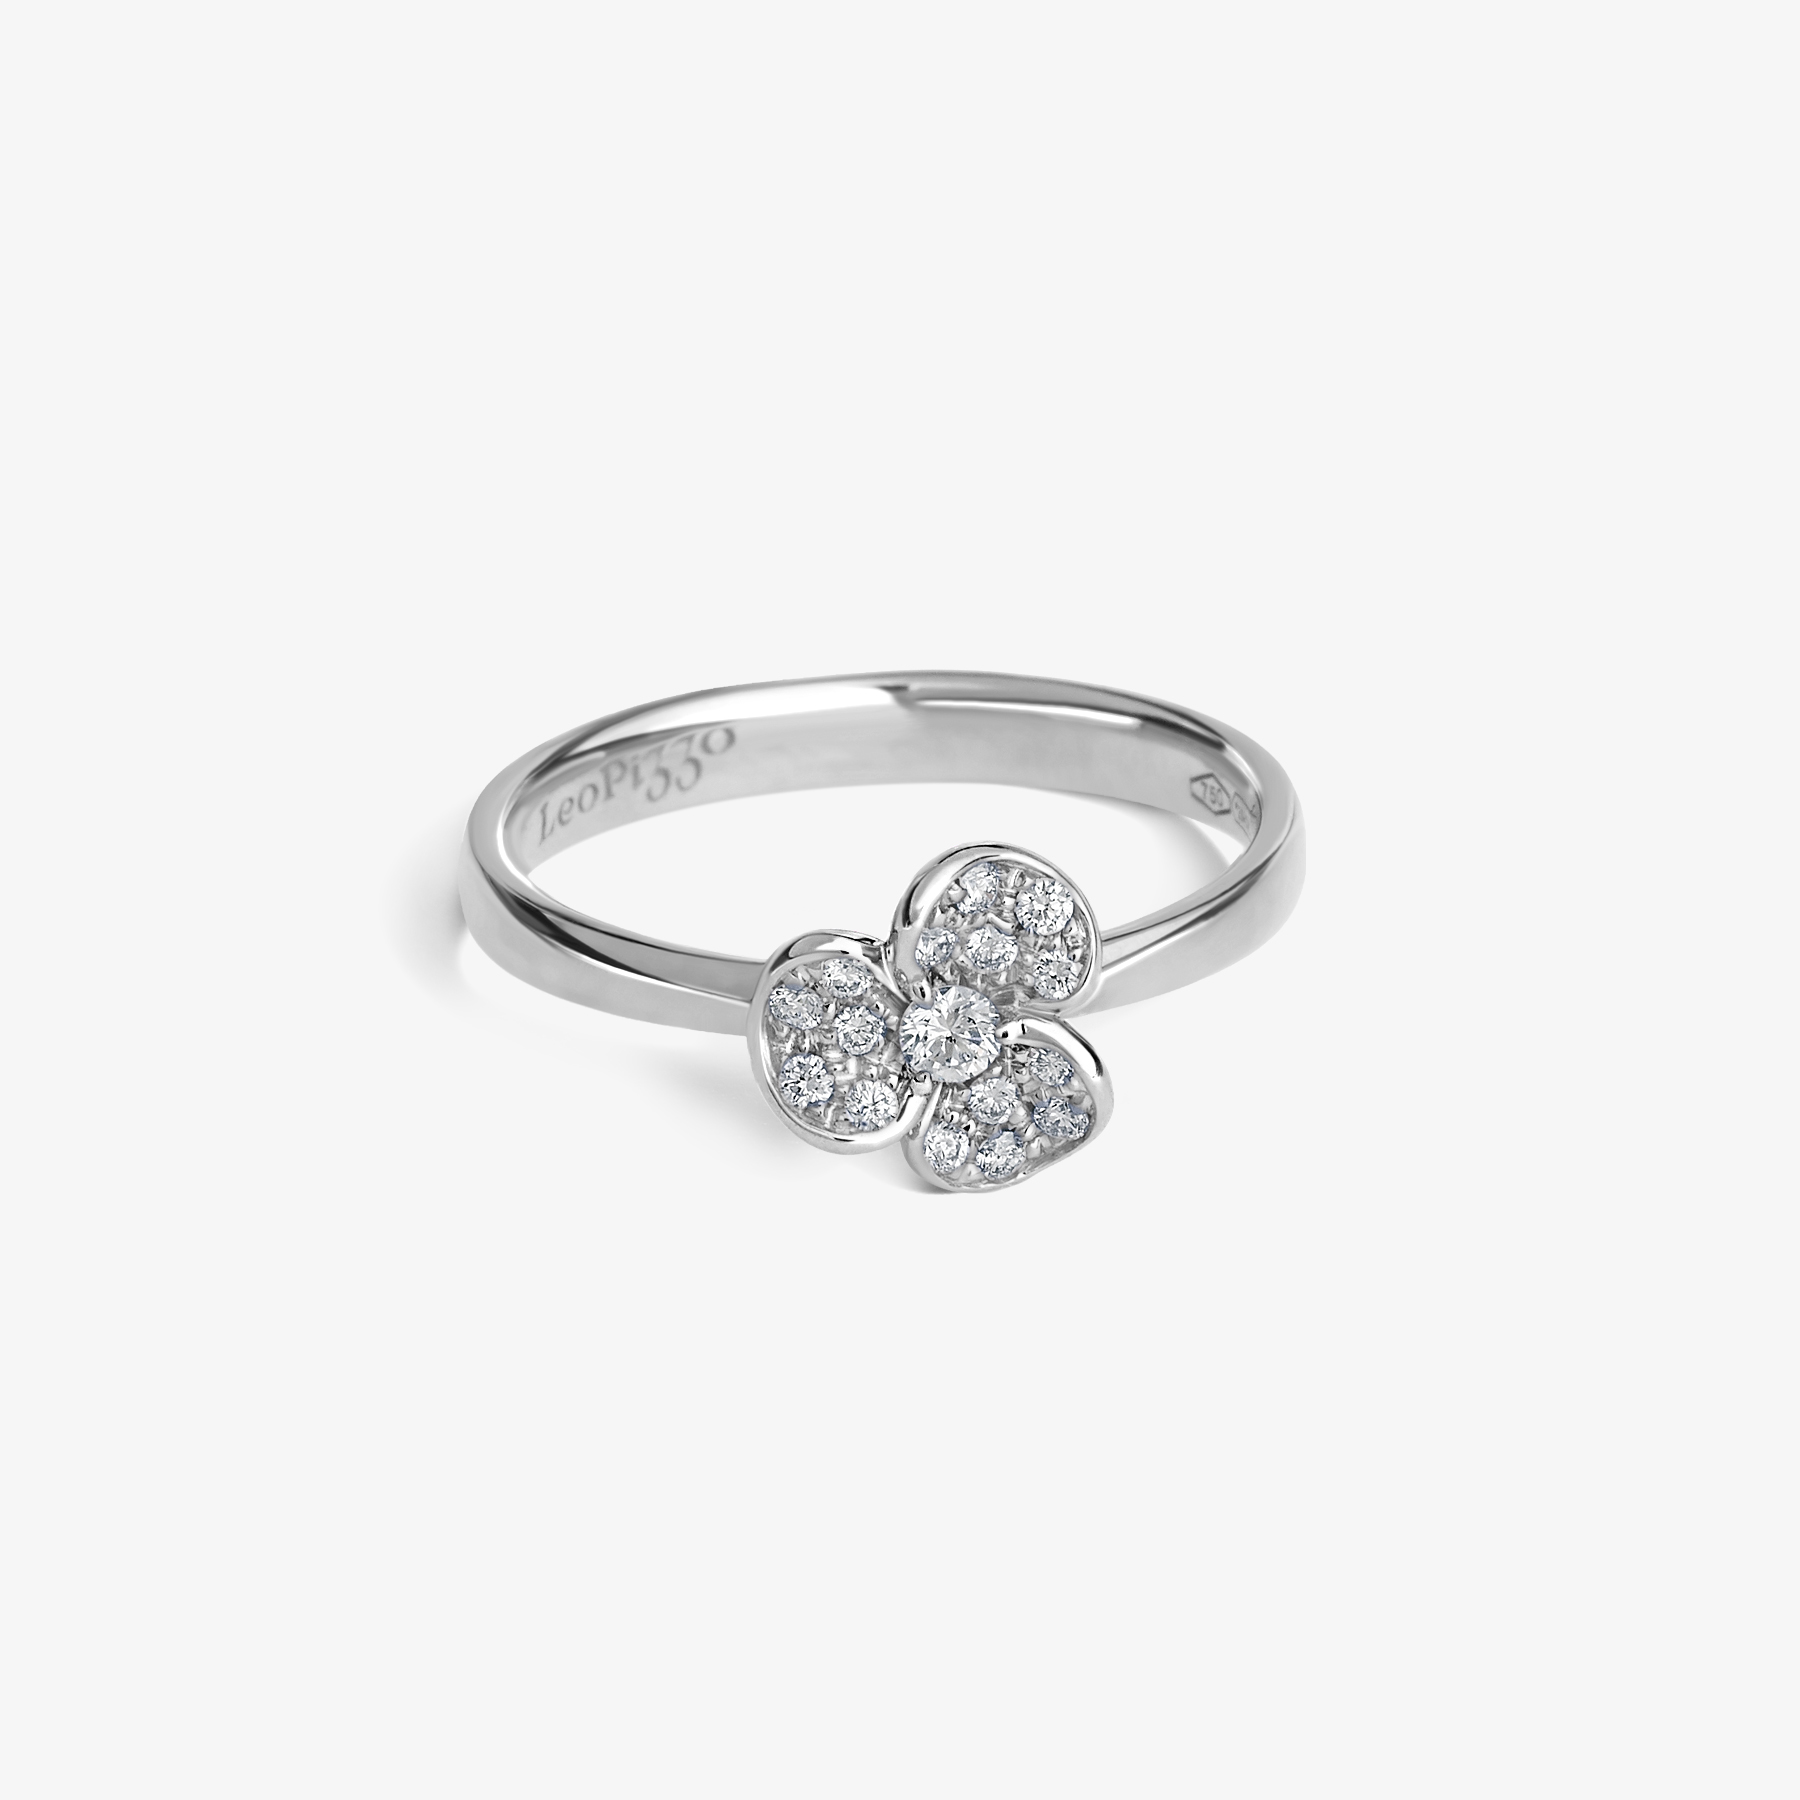 Candy Flora ring